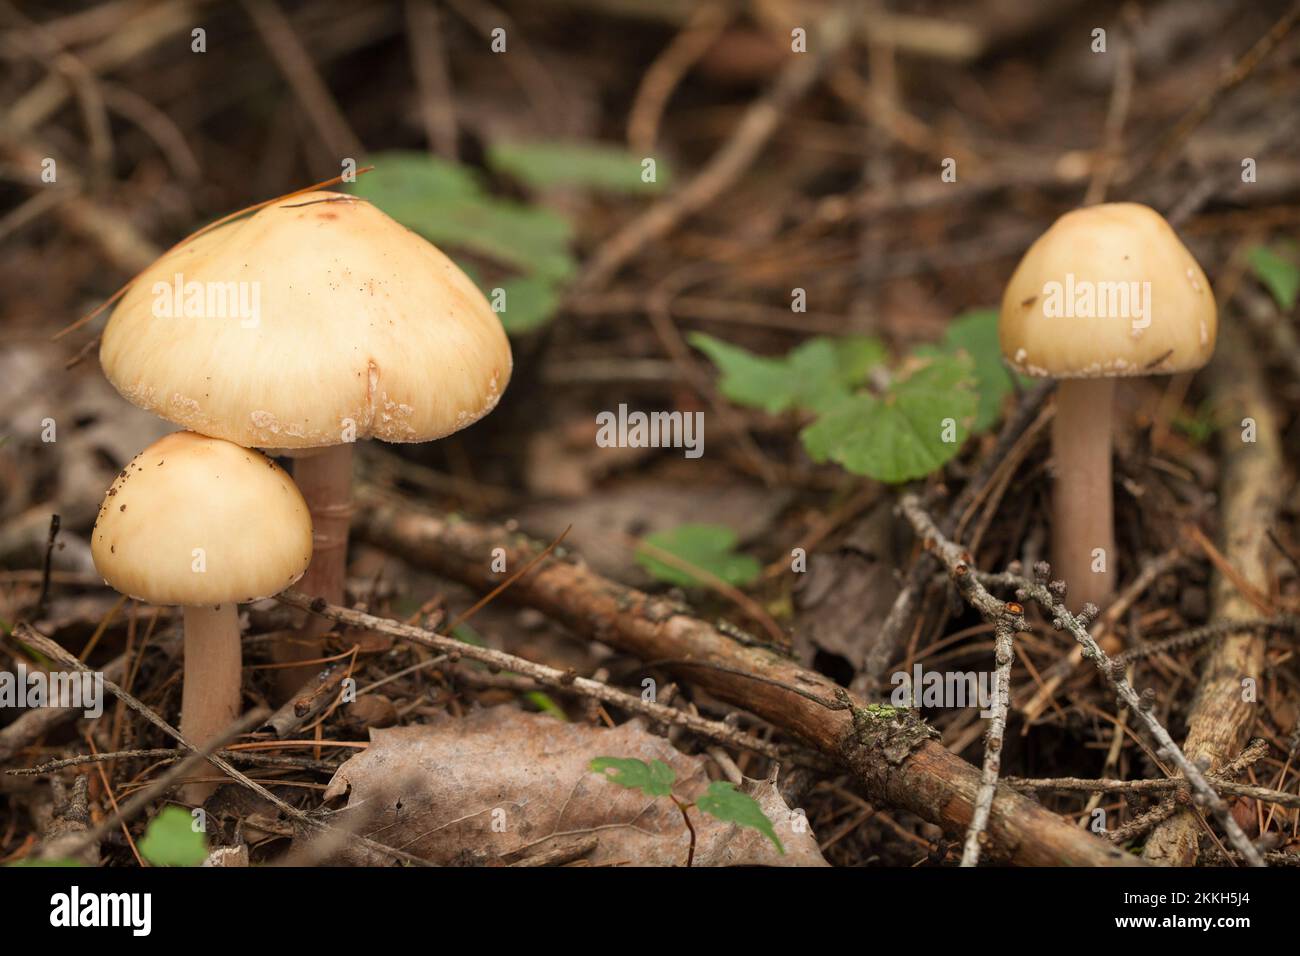 Amanita mushrooms with dried leaves and pine needles on the ground in the forest. Amanita fungus in the woods. Stock Photo